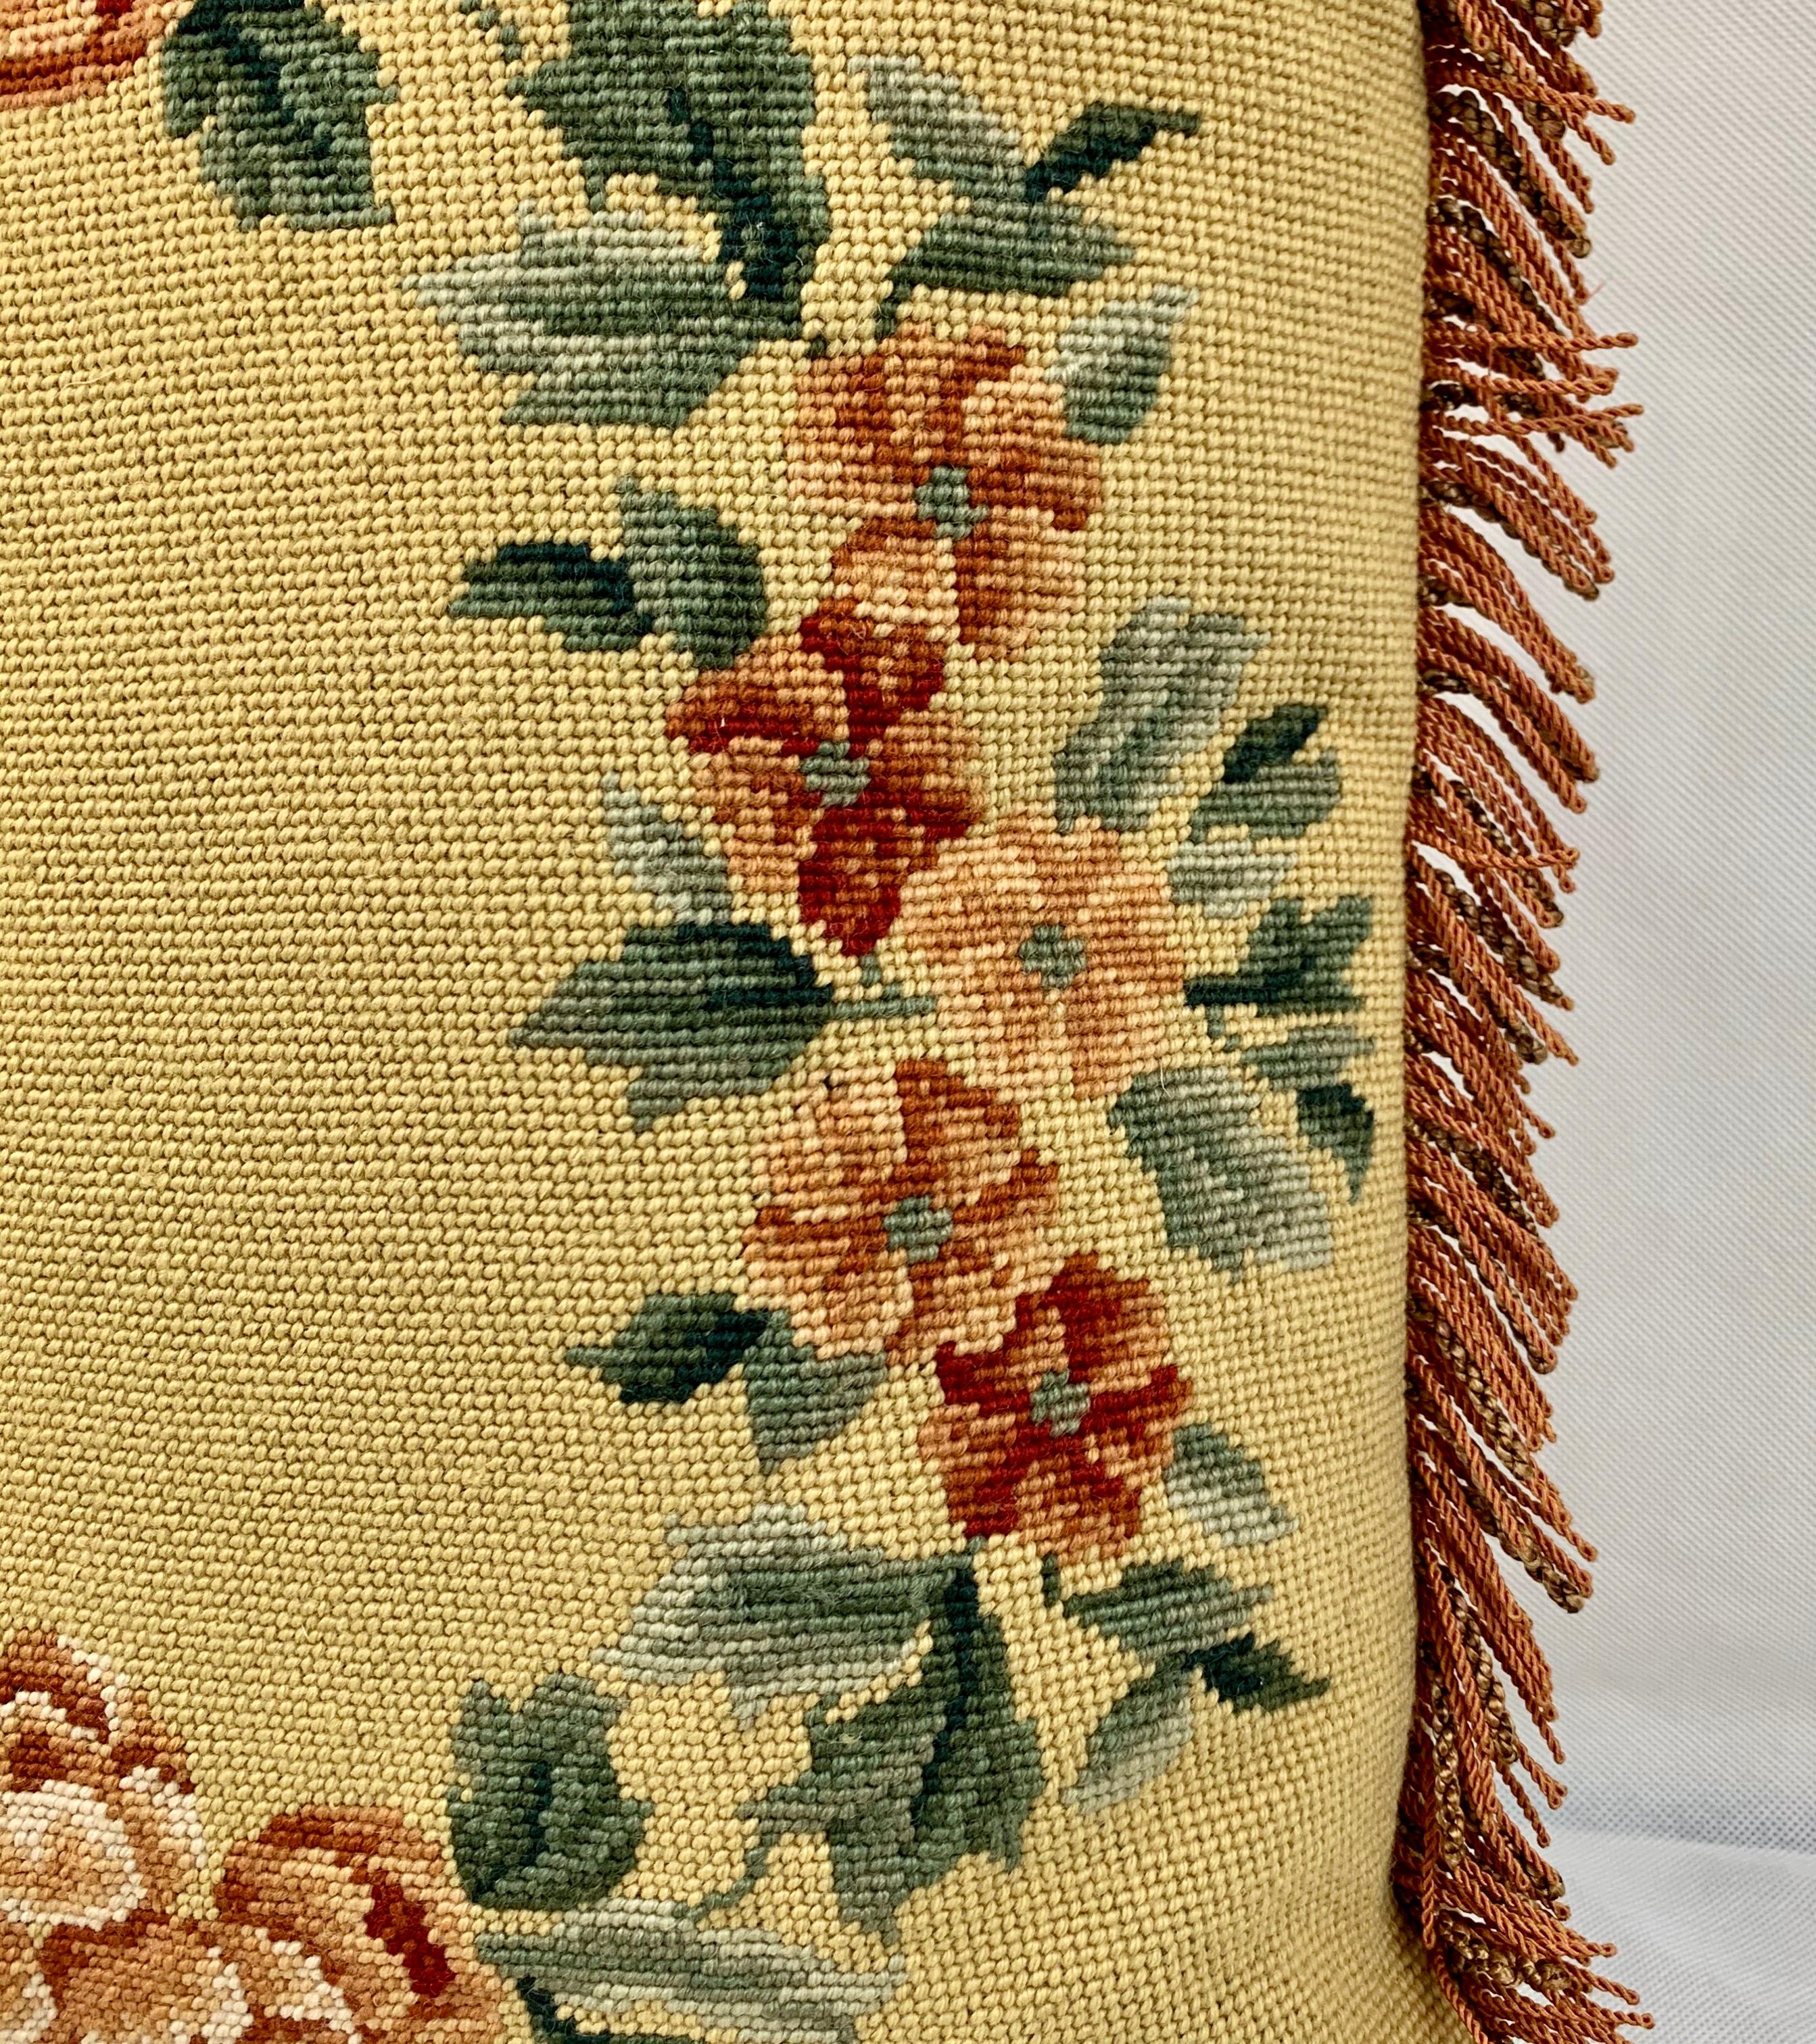 English Hand Needlepointed Cushion/Pillow with Decorative Floral Motif & Fringed Border